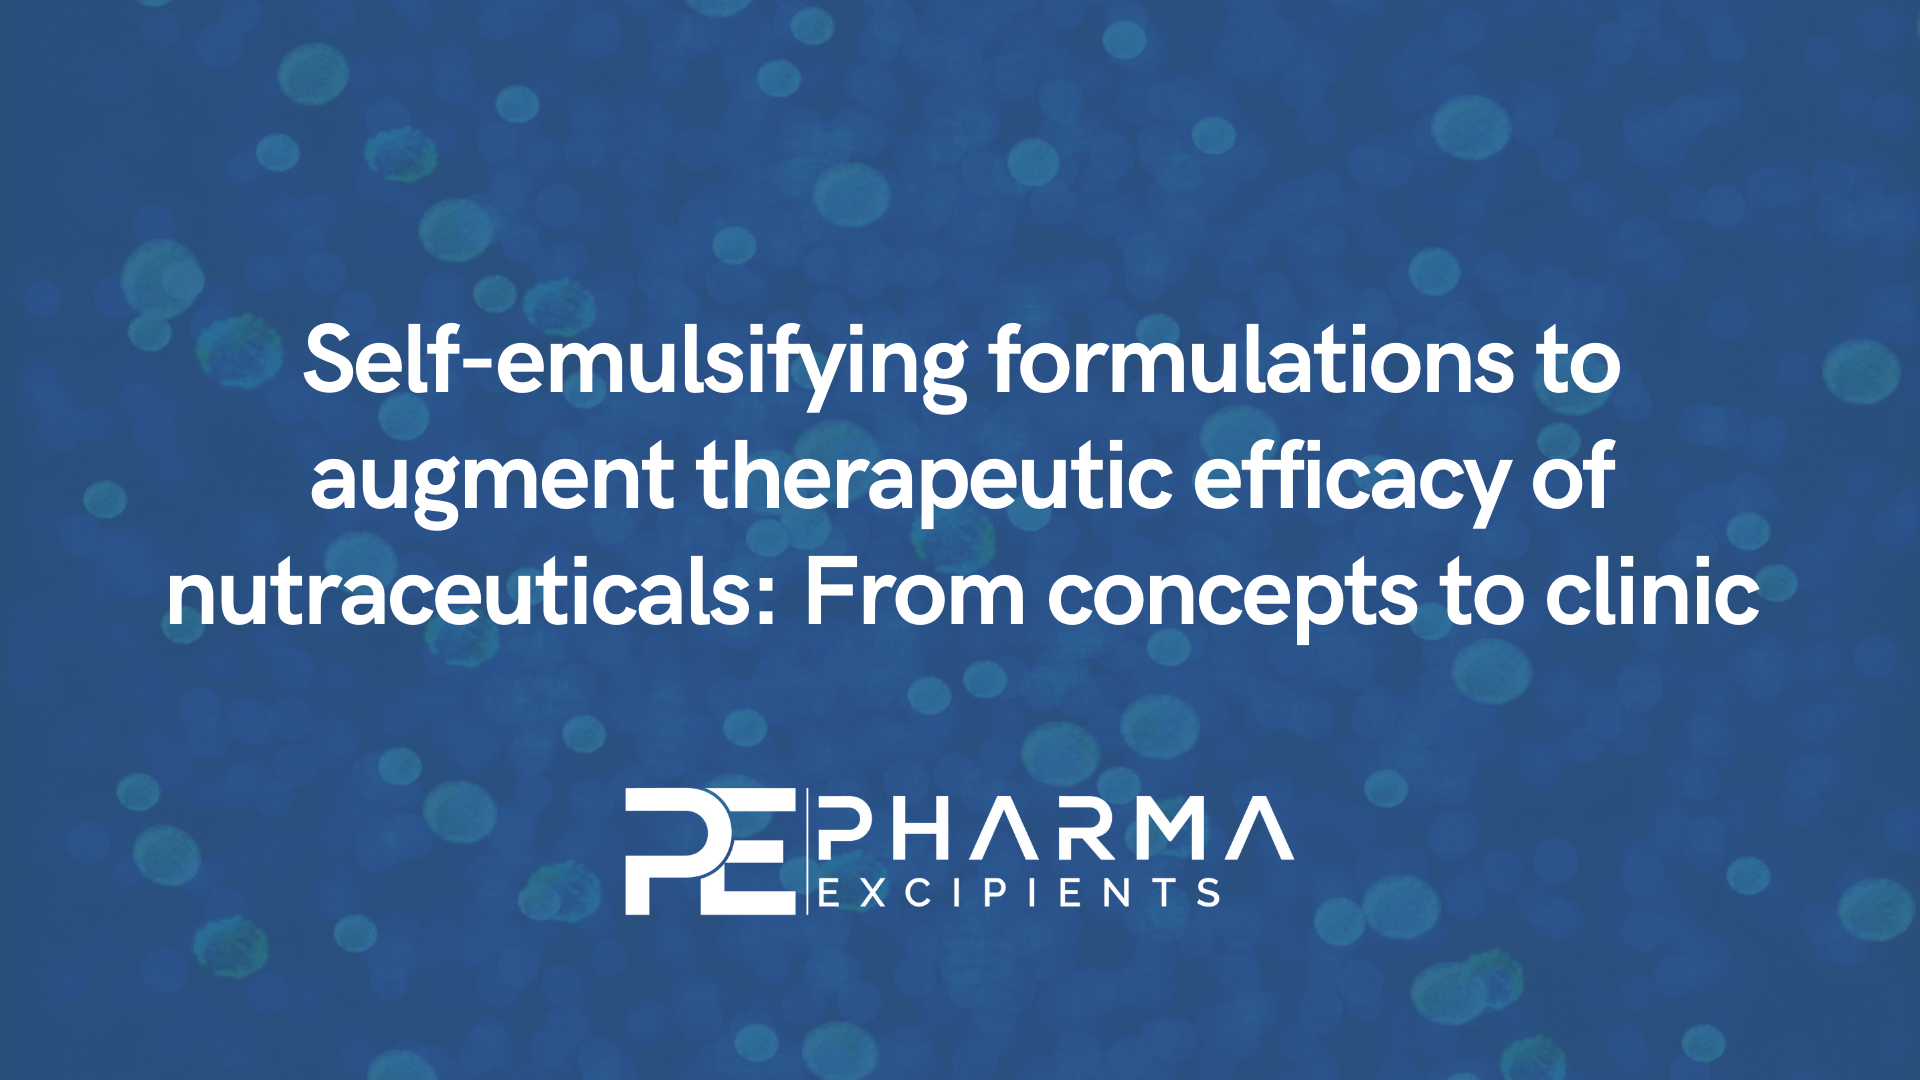 Self-emulsifying formulations to augment therapeutic efficacy of nutraceuticals: From concepts to clinic